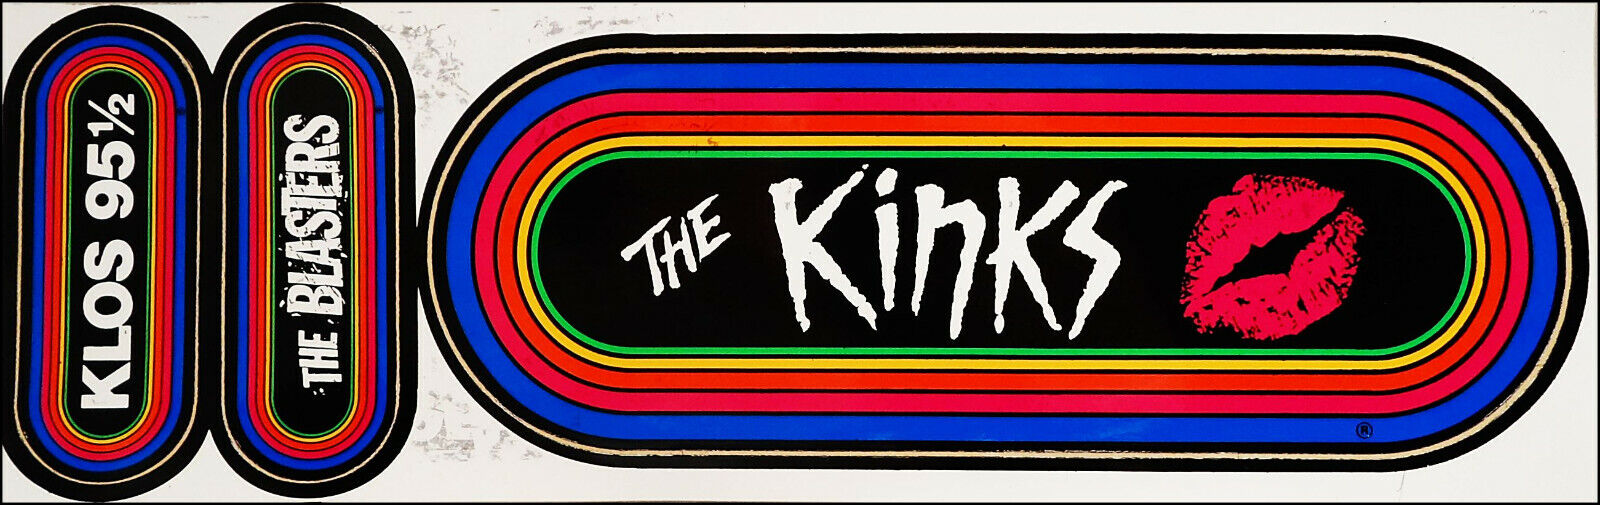 The Kinks 1985 Word Of Mouth Tour Klos Promo Concert Rainbow Bumper Stickers